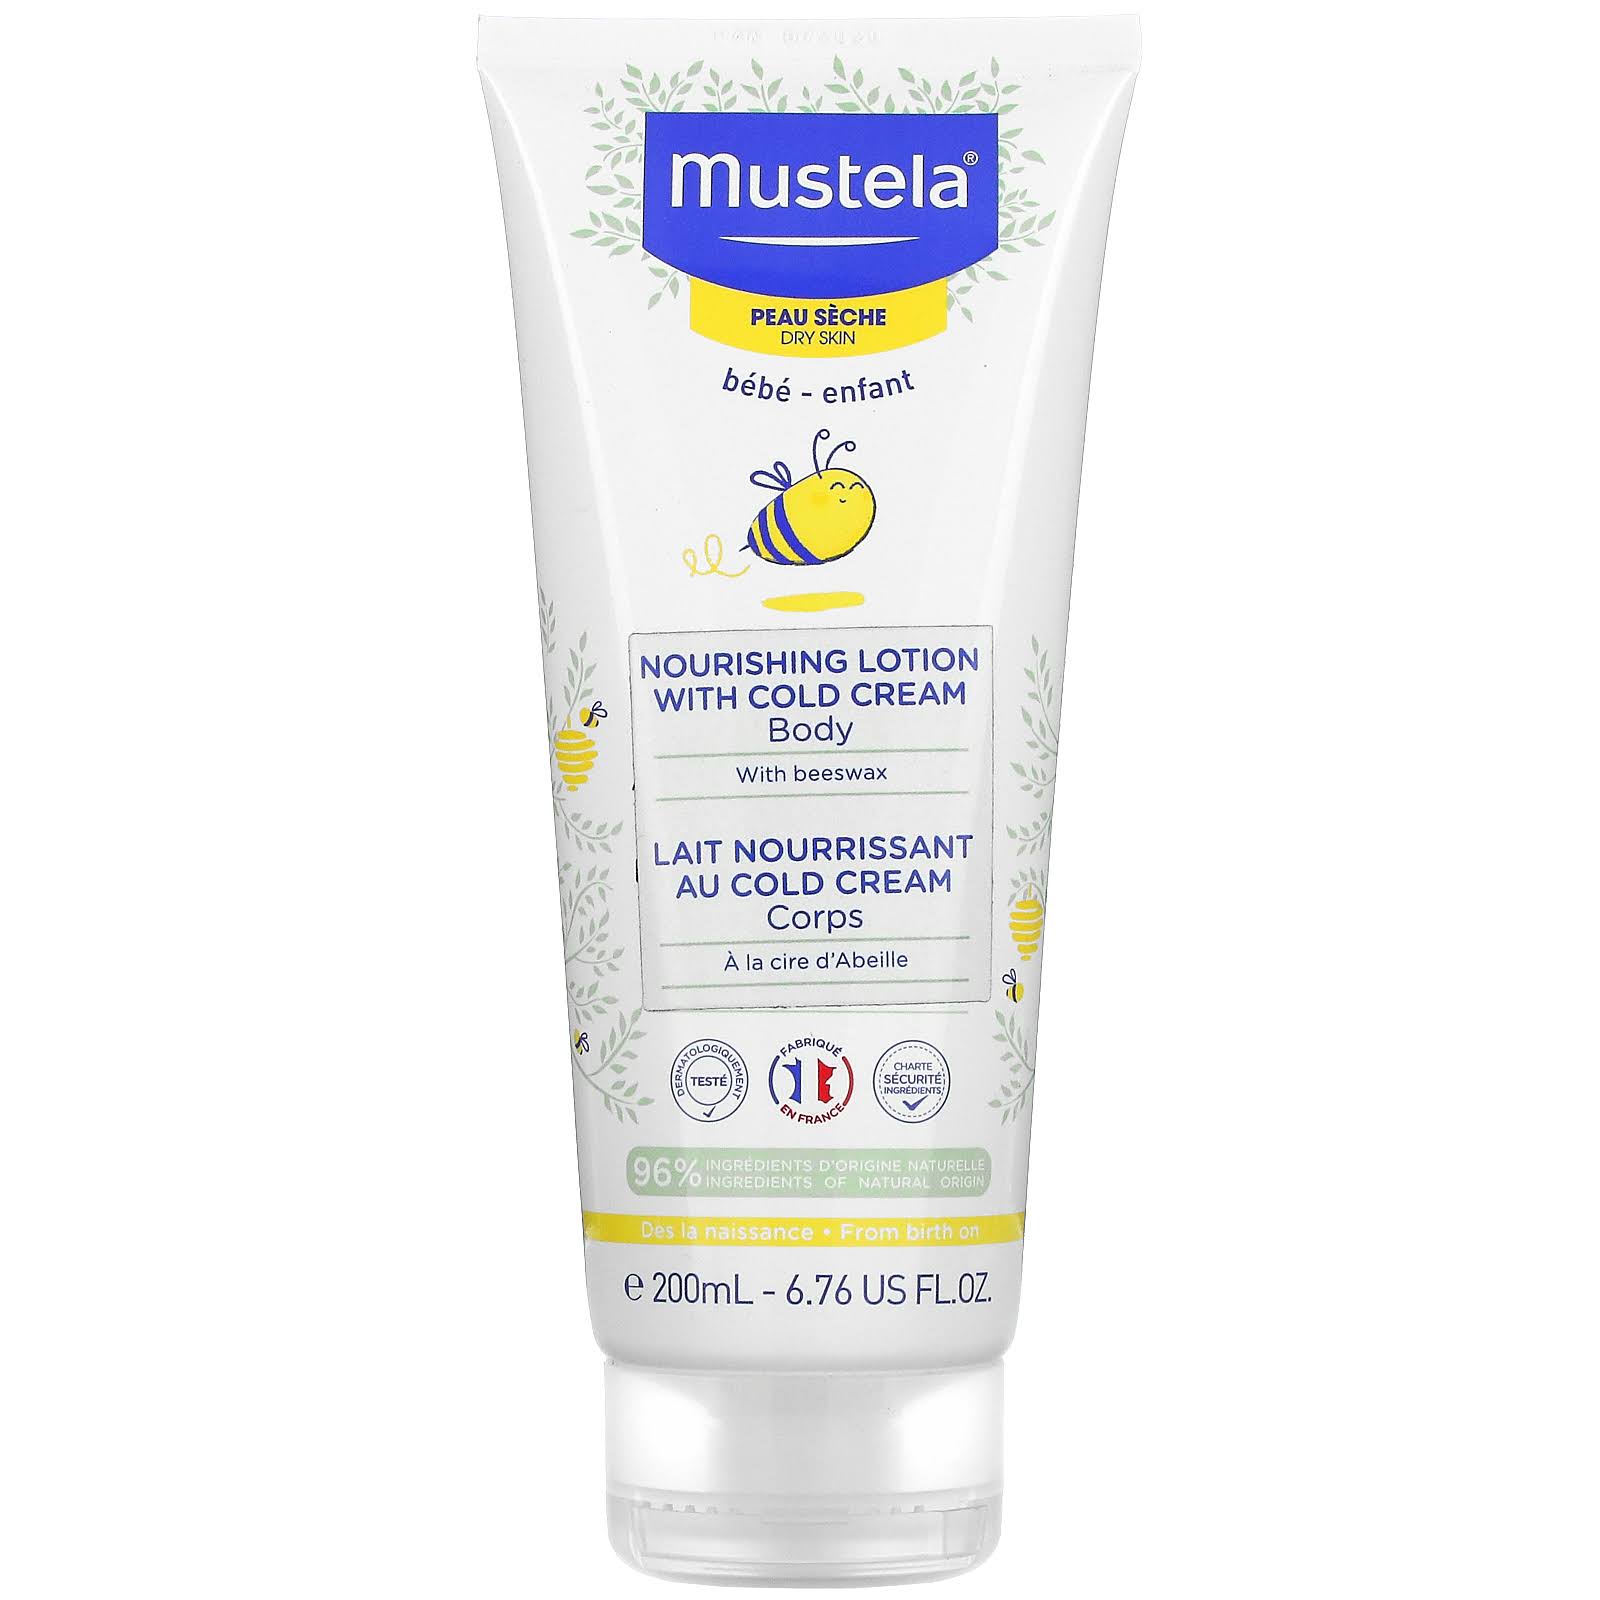 Mustela Nourishing Body Lotion With Cold Cream - For Dry Skin - 200ml